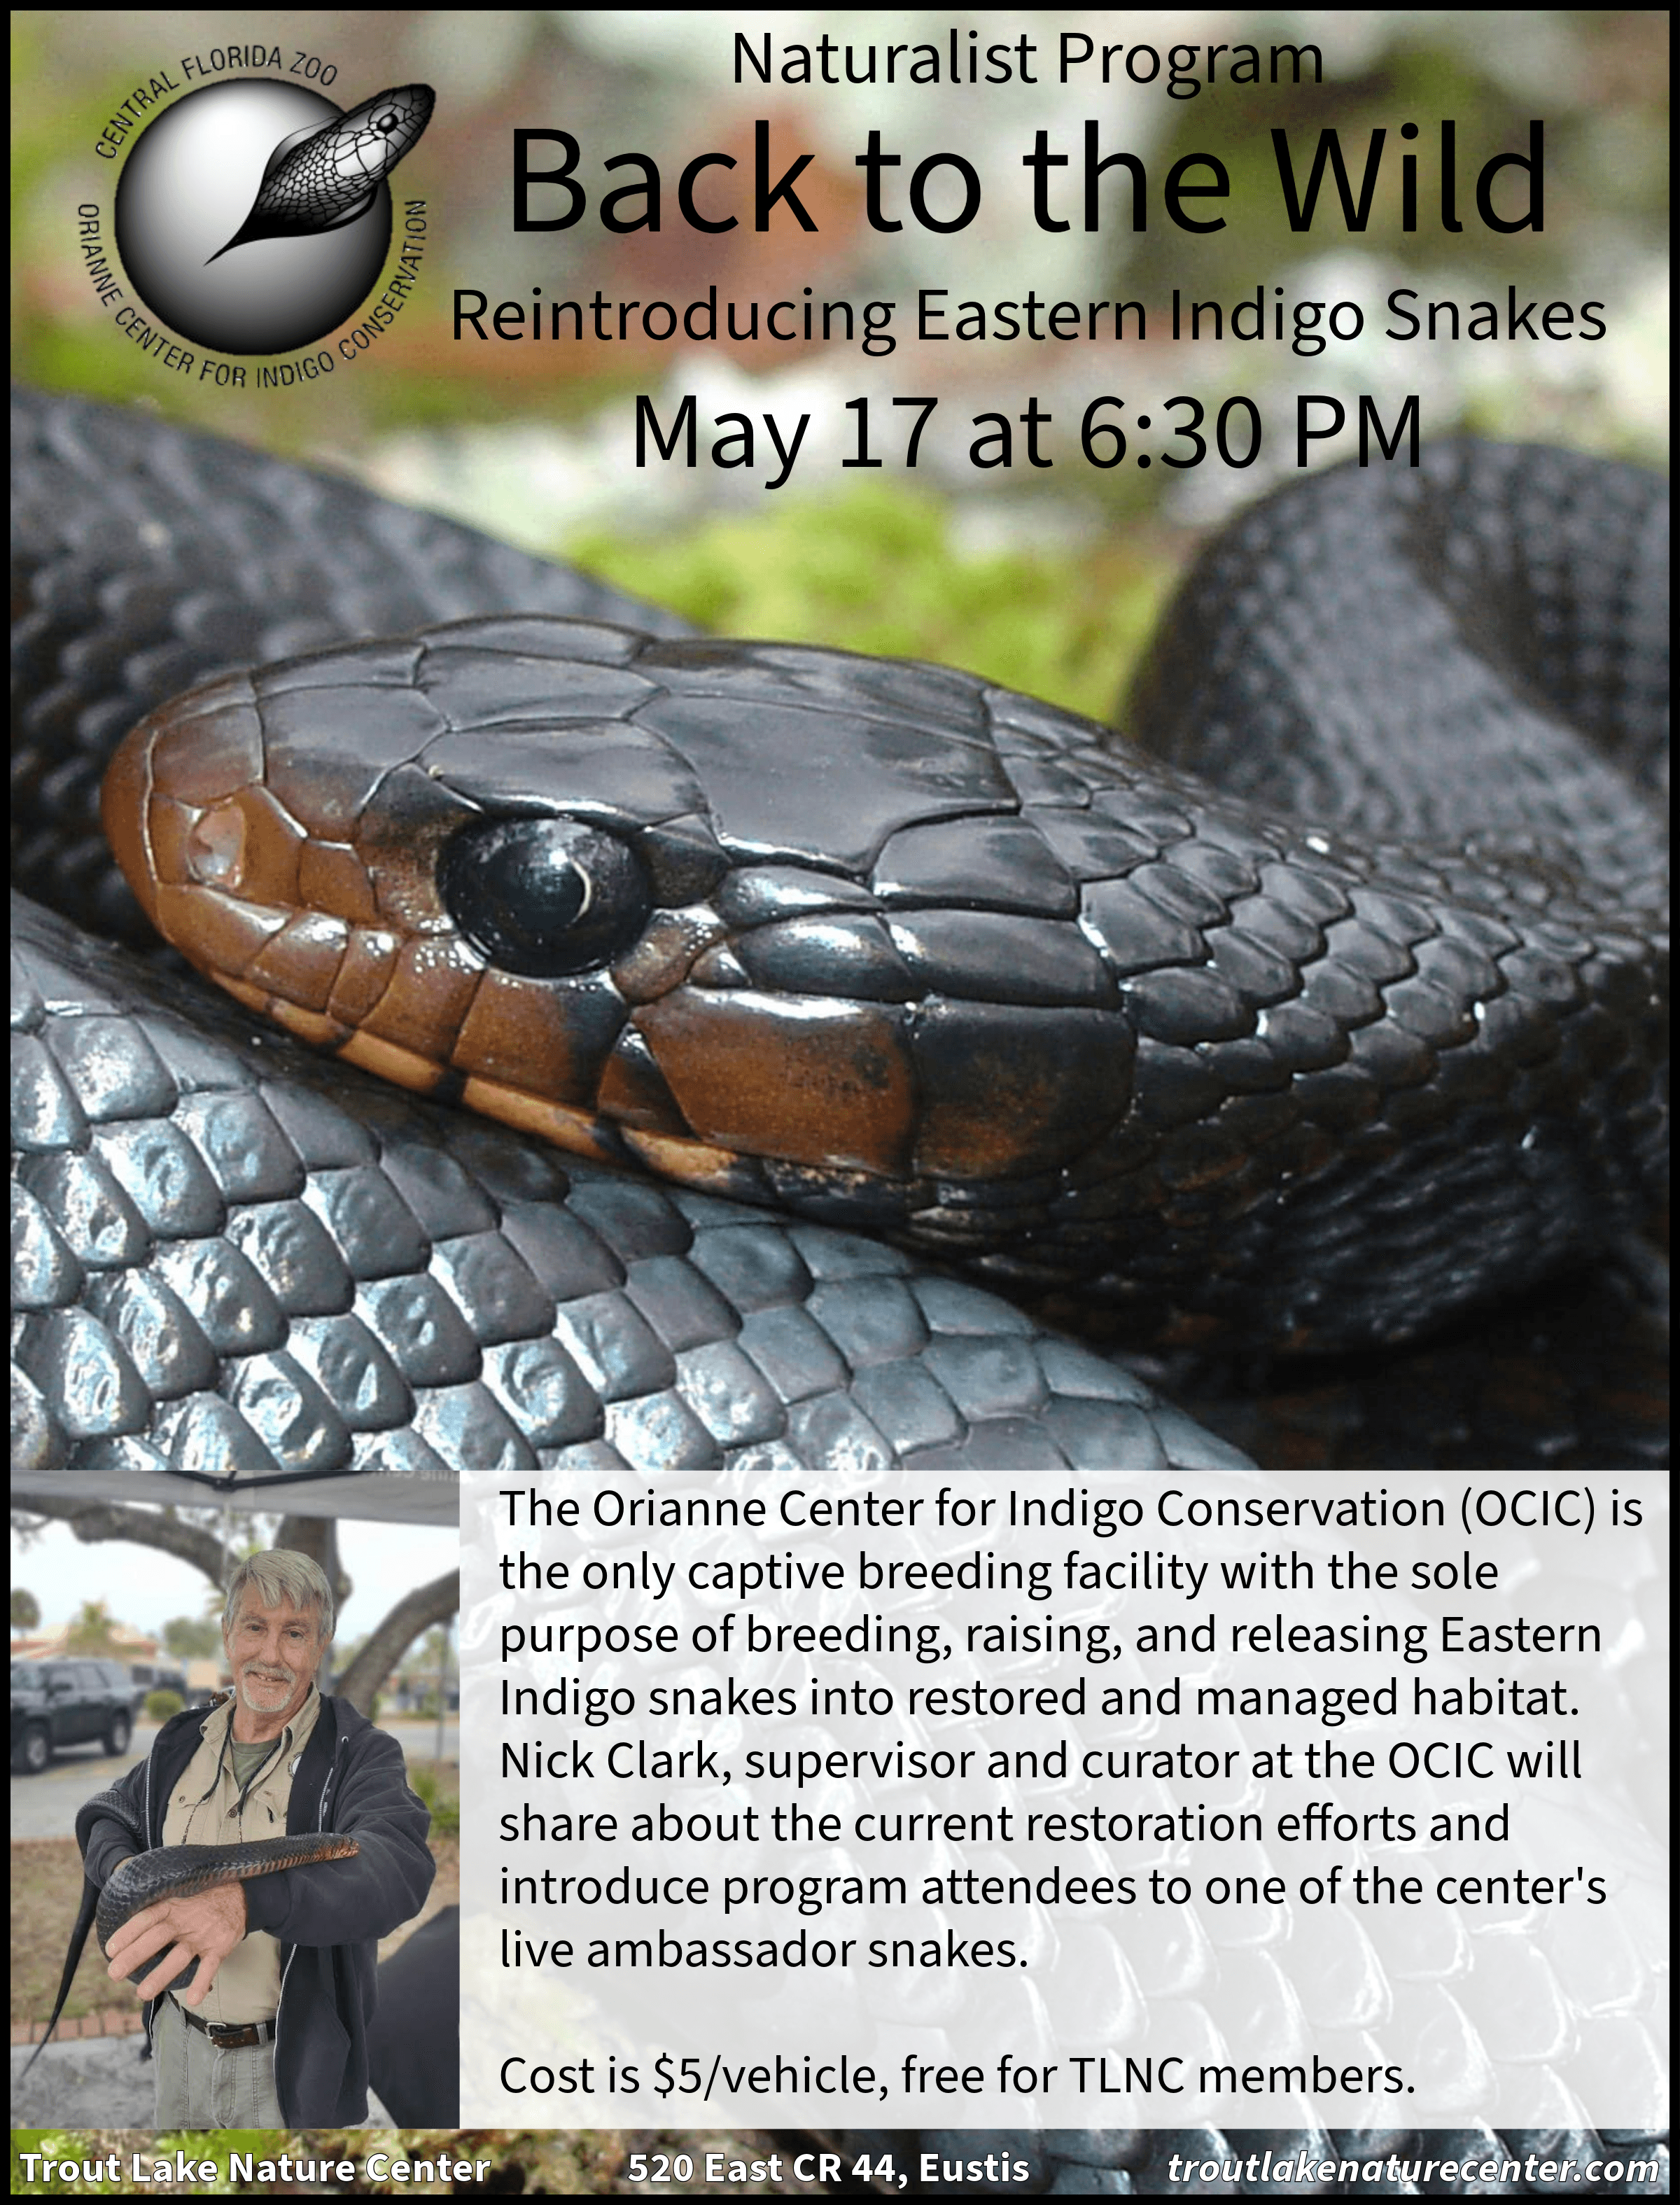 Event flyer with an indigo snake and event details.